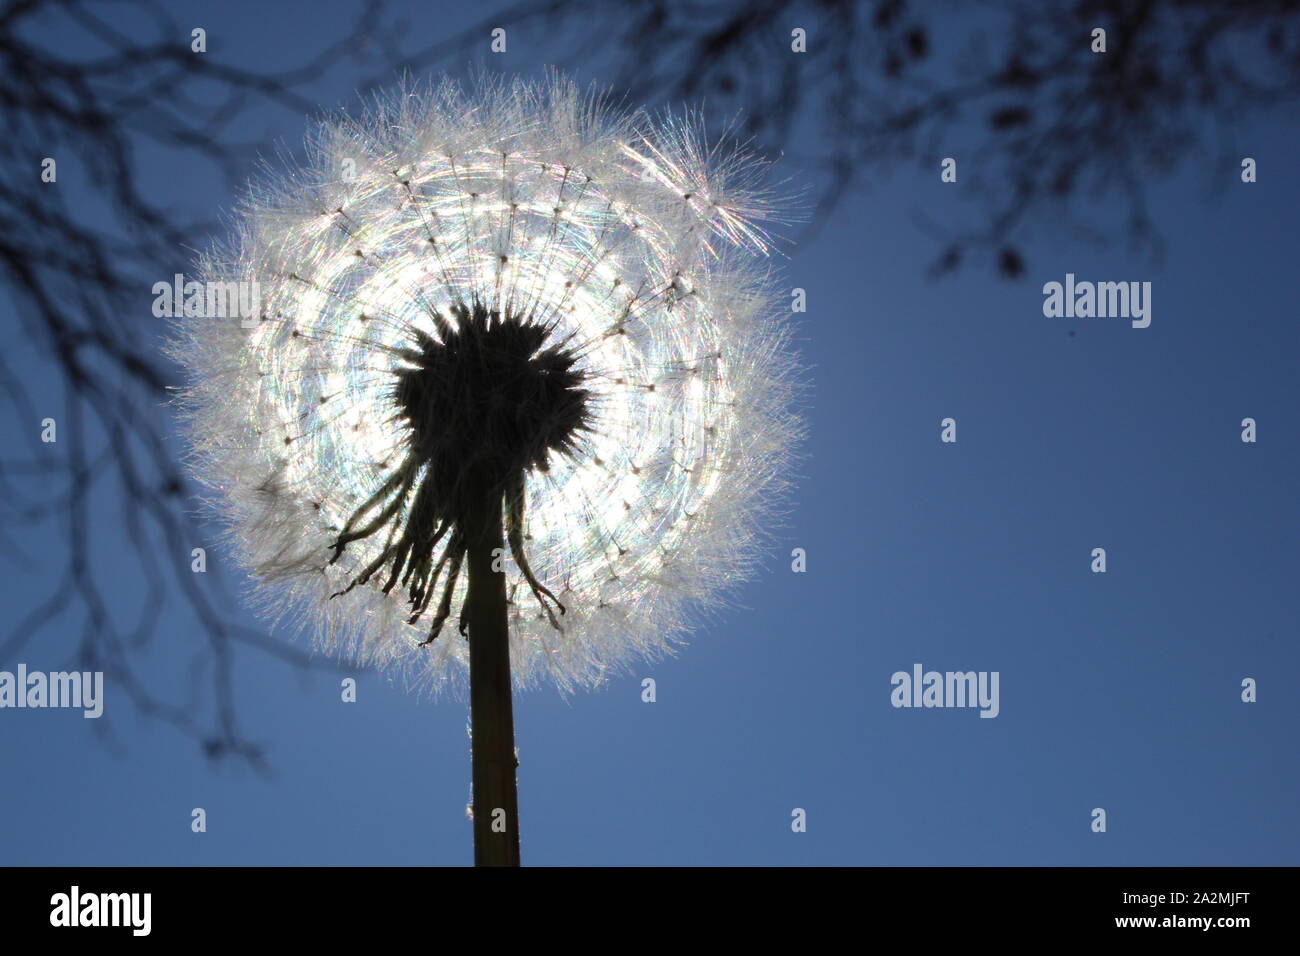 A dandelion seed head backlit by the sun Stock Photo